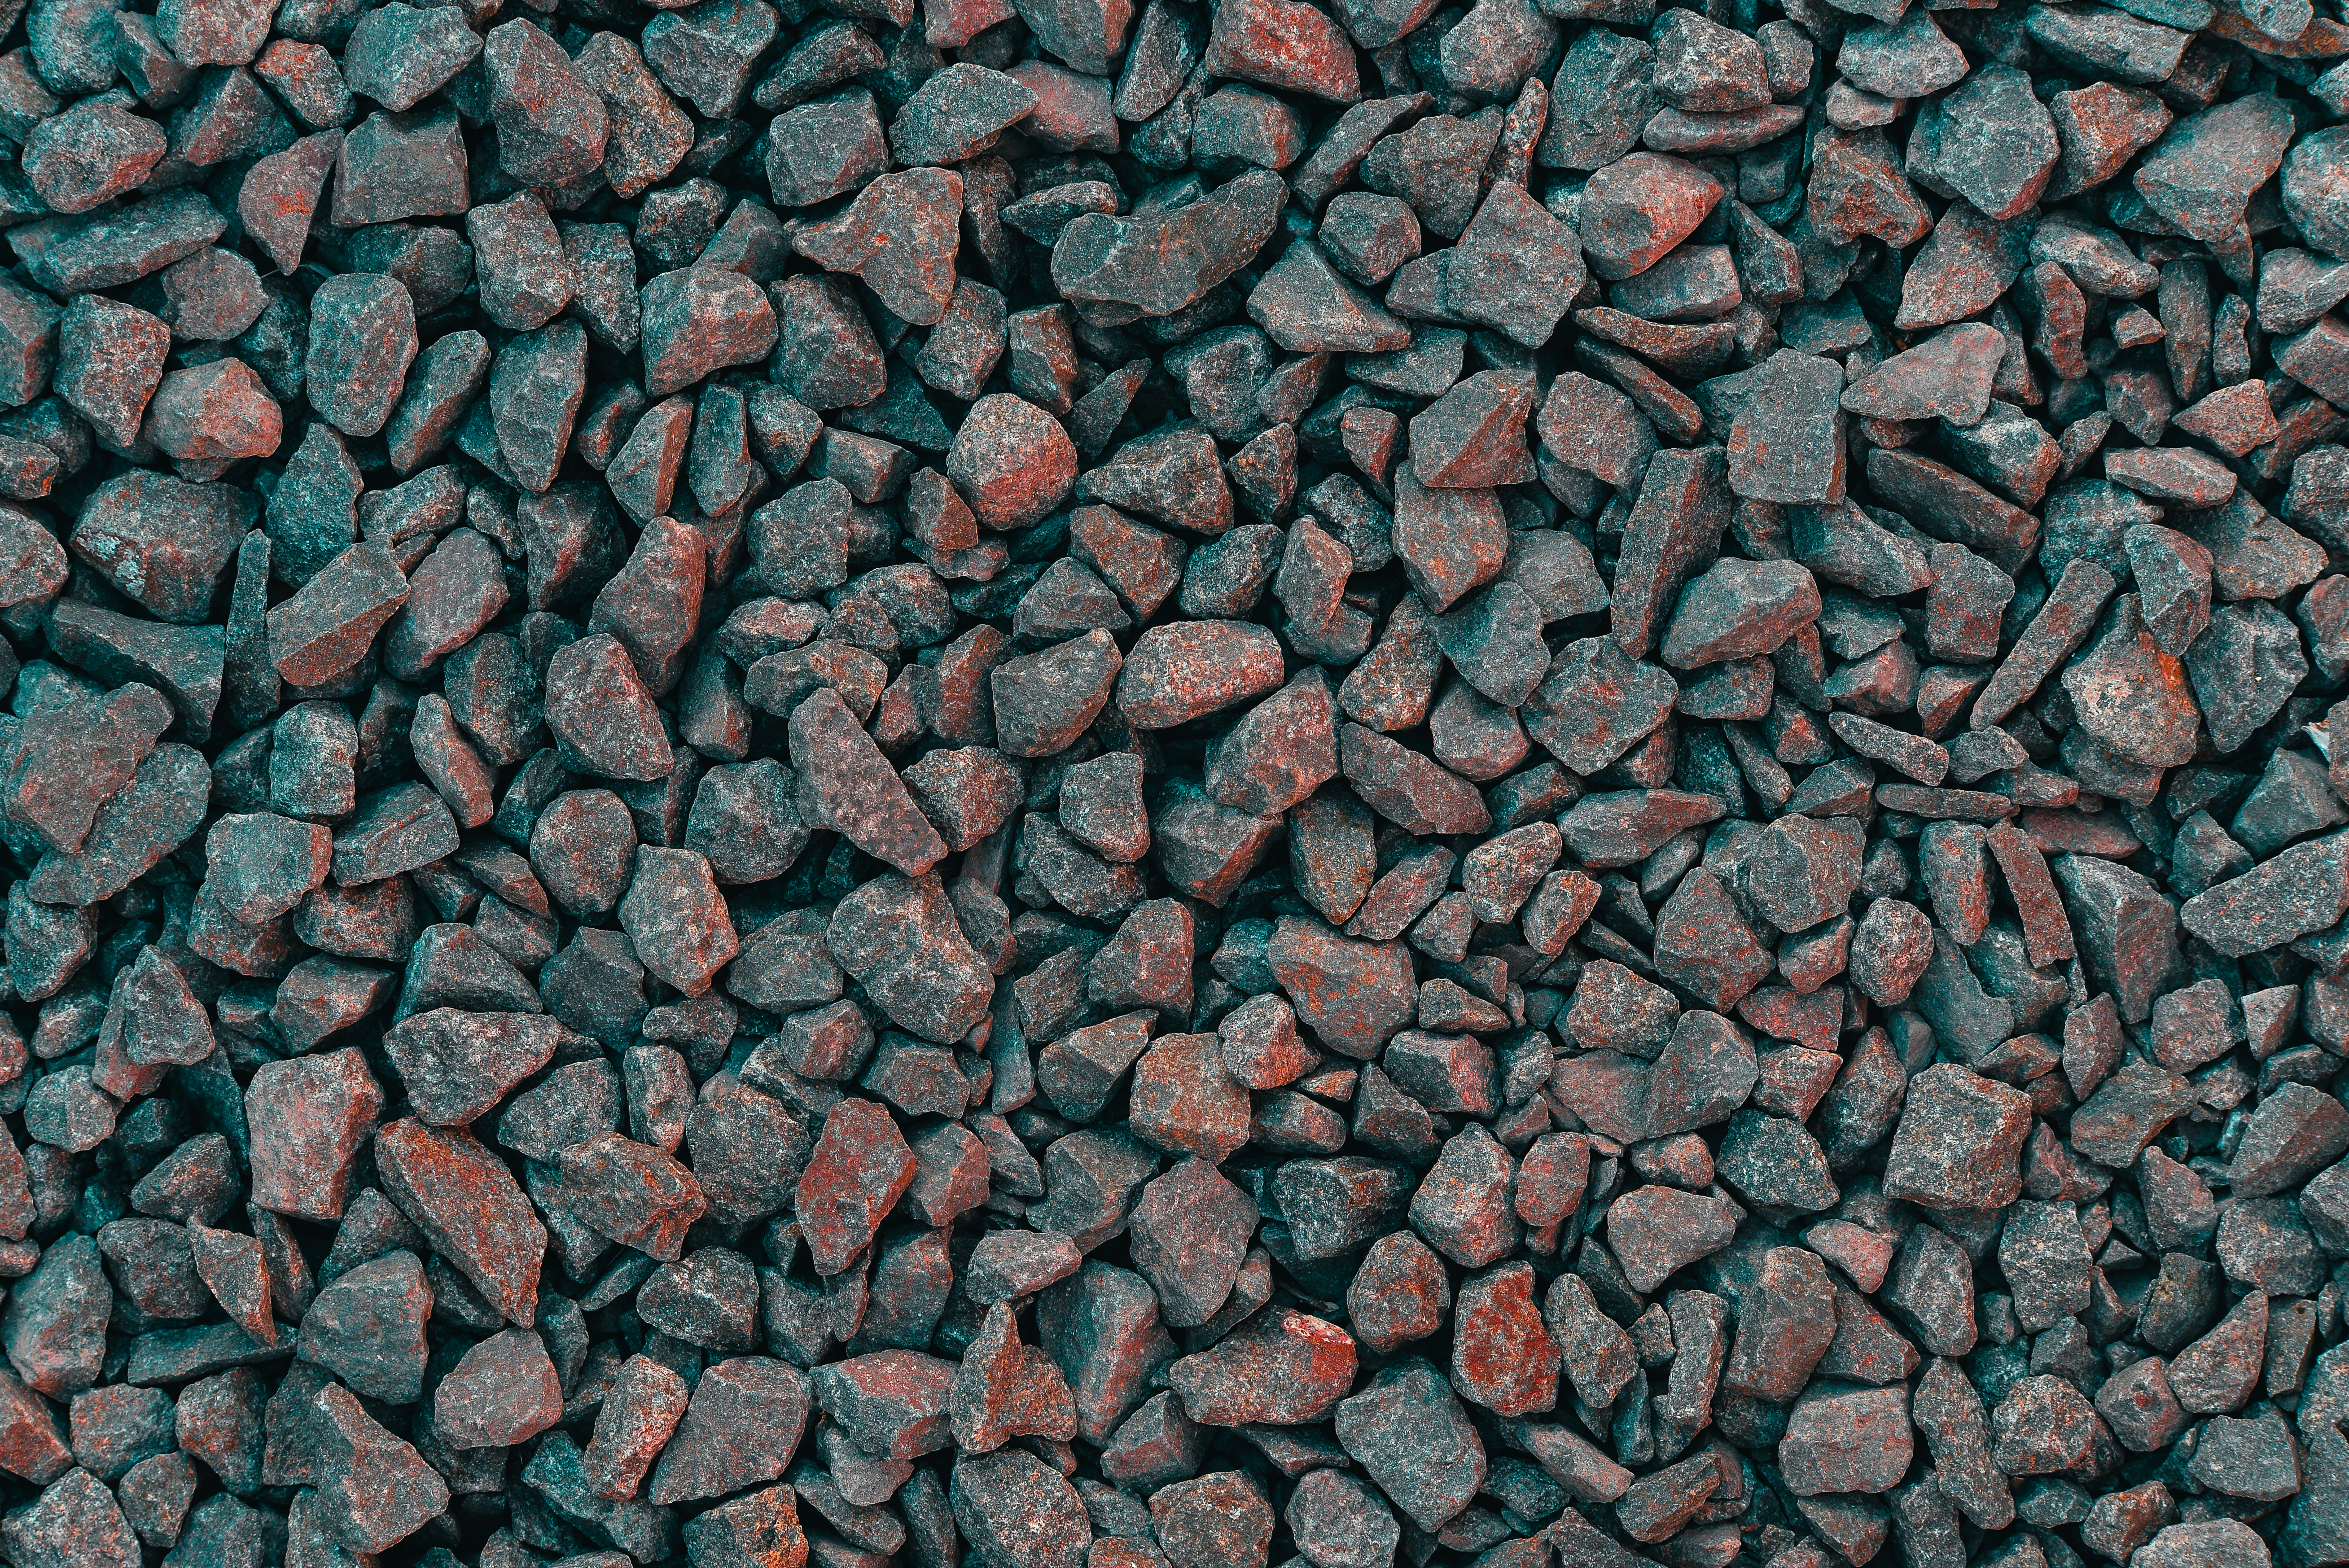 97301 download wallpaper textures, stones, pebble, texture, gravel screensavers and pictures for free